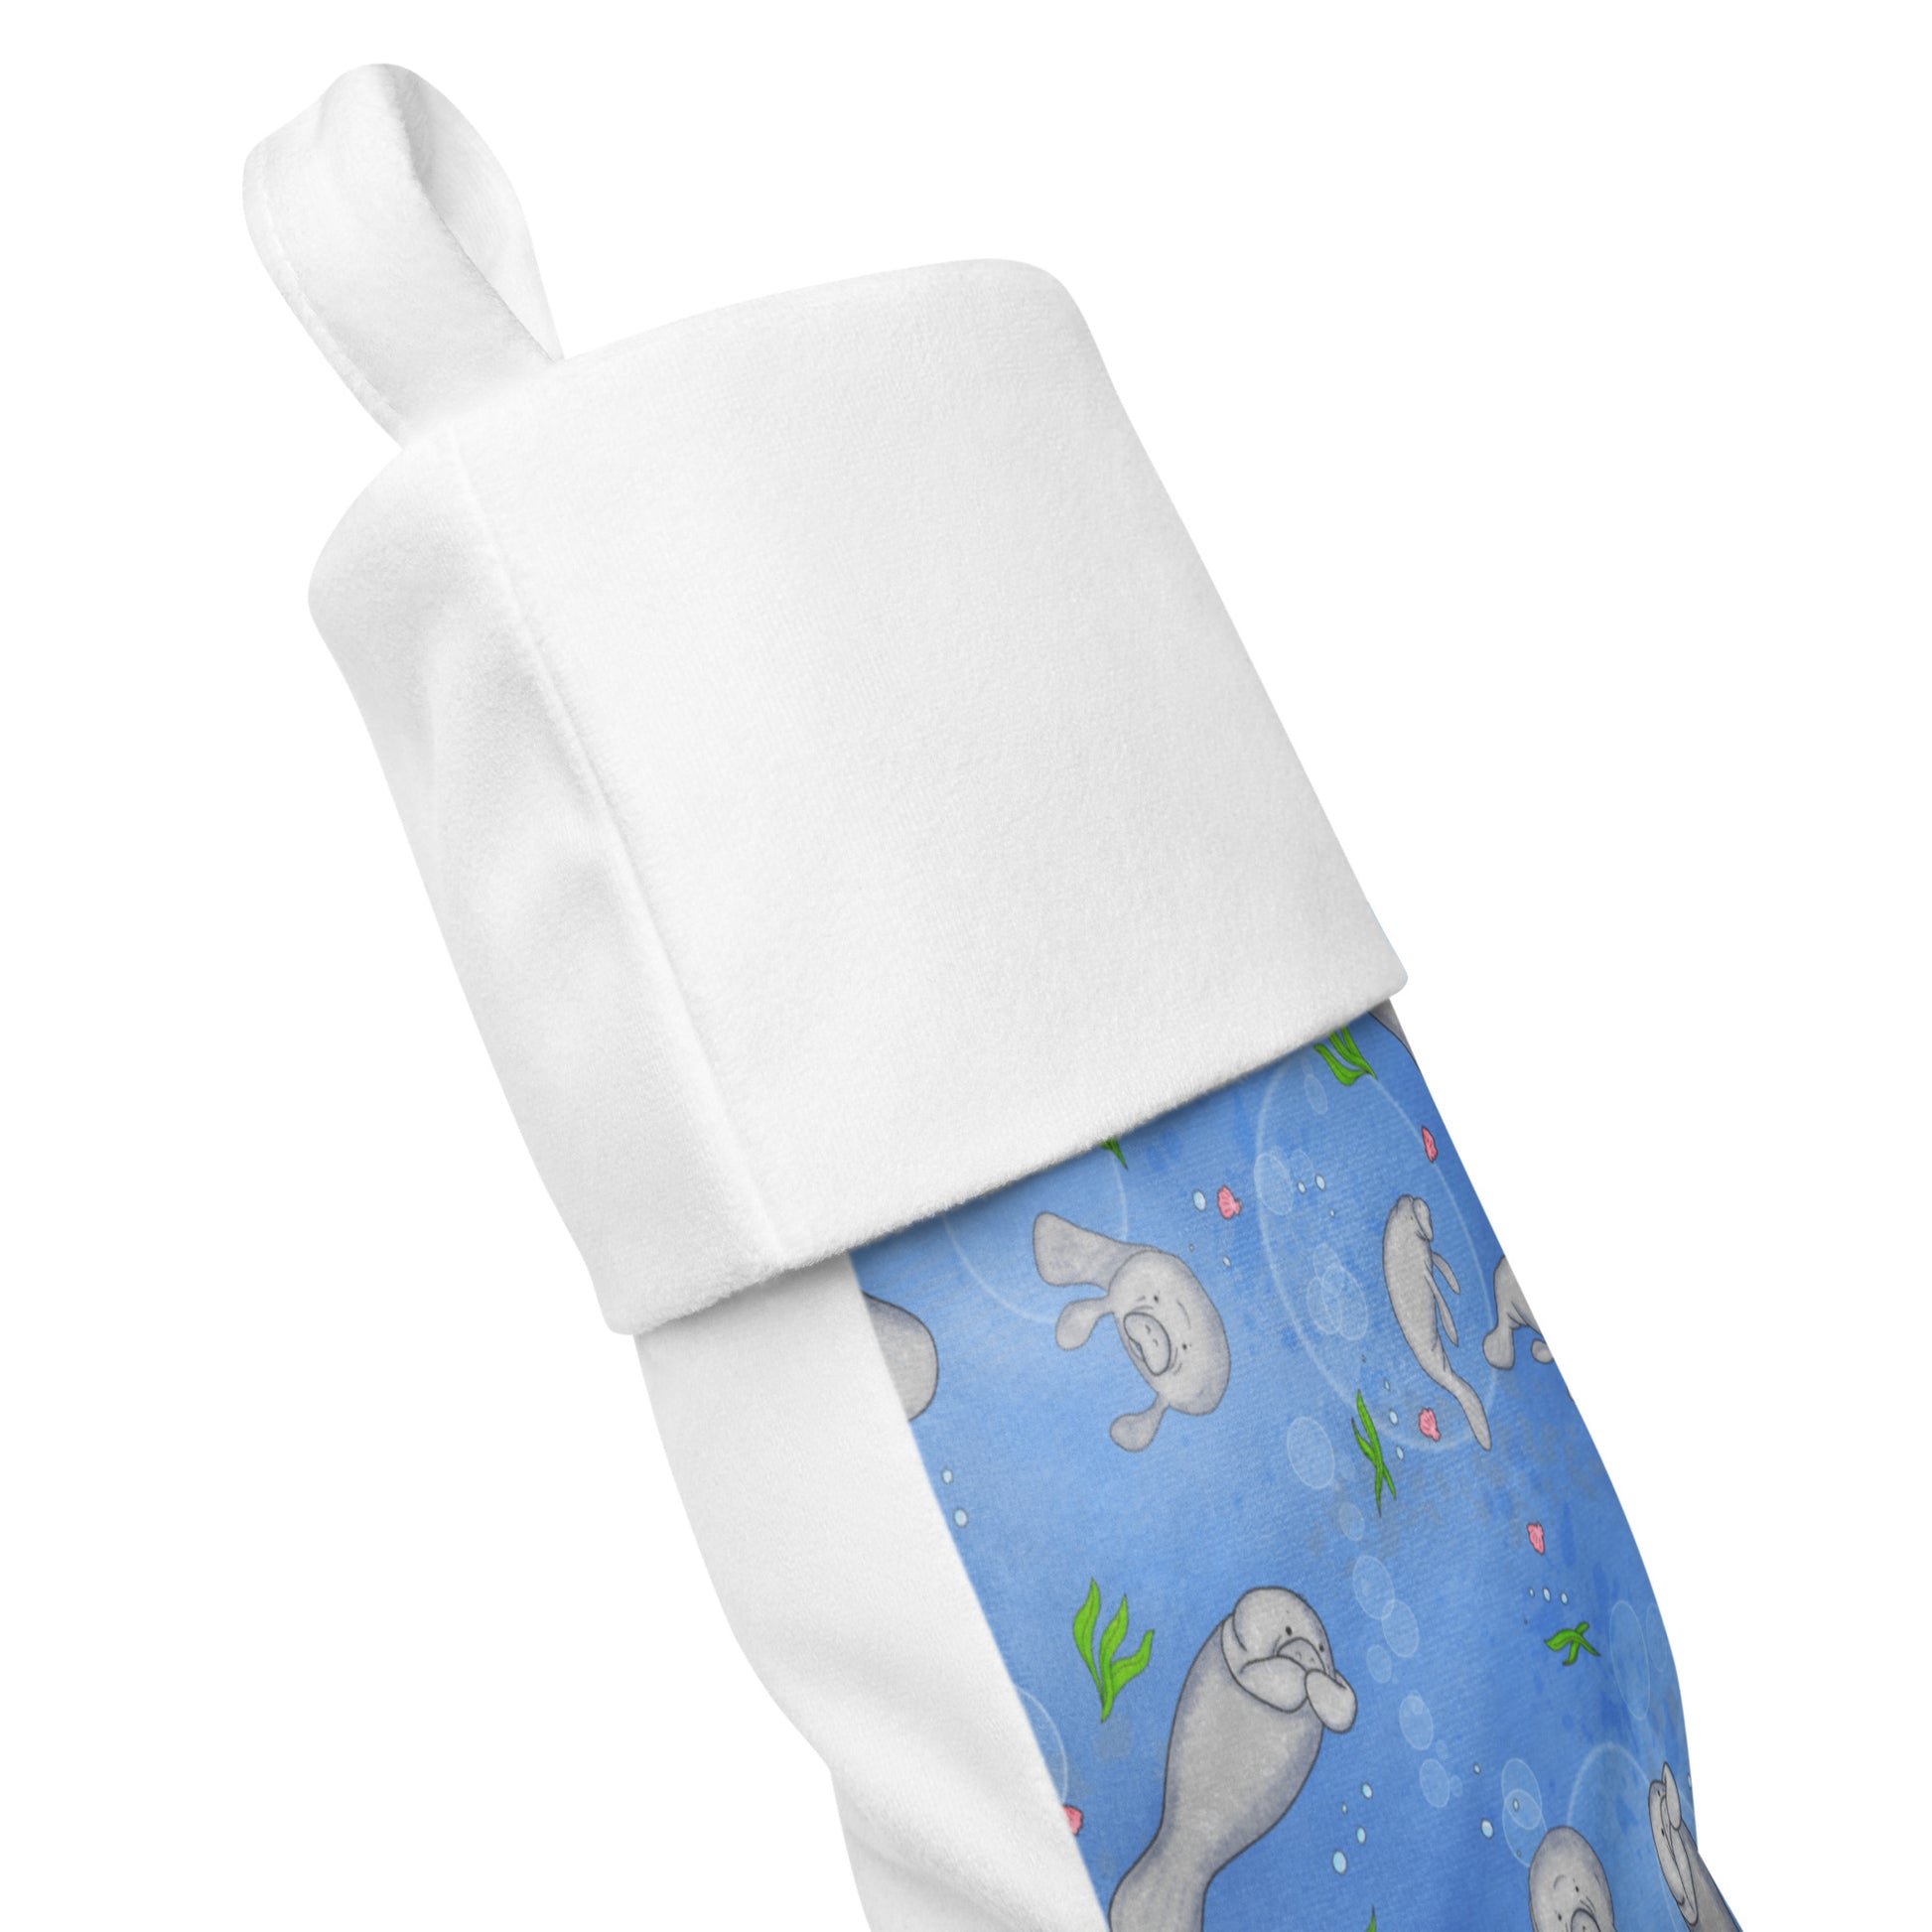 Limited Edition Manatee Christmas Stocking.  7 by 18 inches. The front has a hand-illustrated manatee design with an off-white polyester fabric on the back. It has a white fold-over cuff and a loop for hanging. Side view shows front and back fabric.